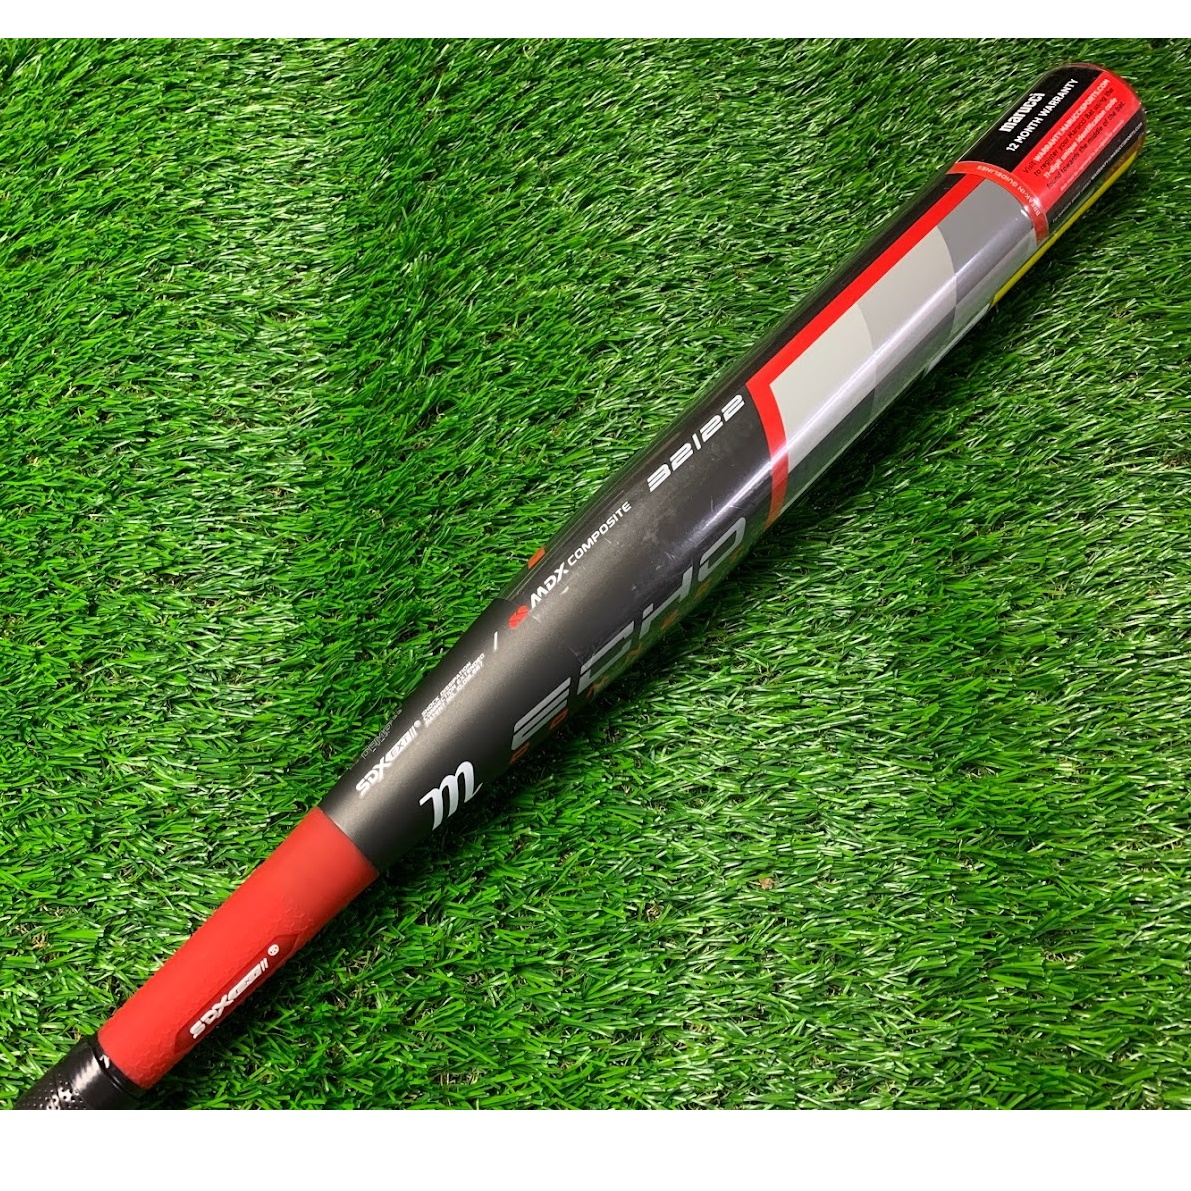 marucci-echo-connect-fast-pitch-softball-bat-32-inch-22-oz-demo MFPEC10-3222-DEMO Marucci  Demo bats are a great opportunity to pick up a high